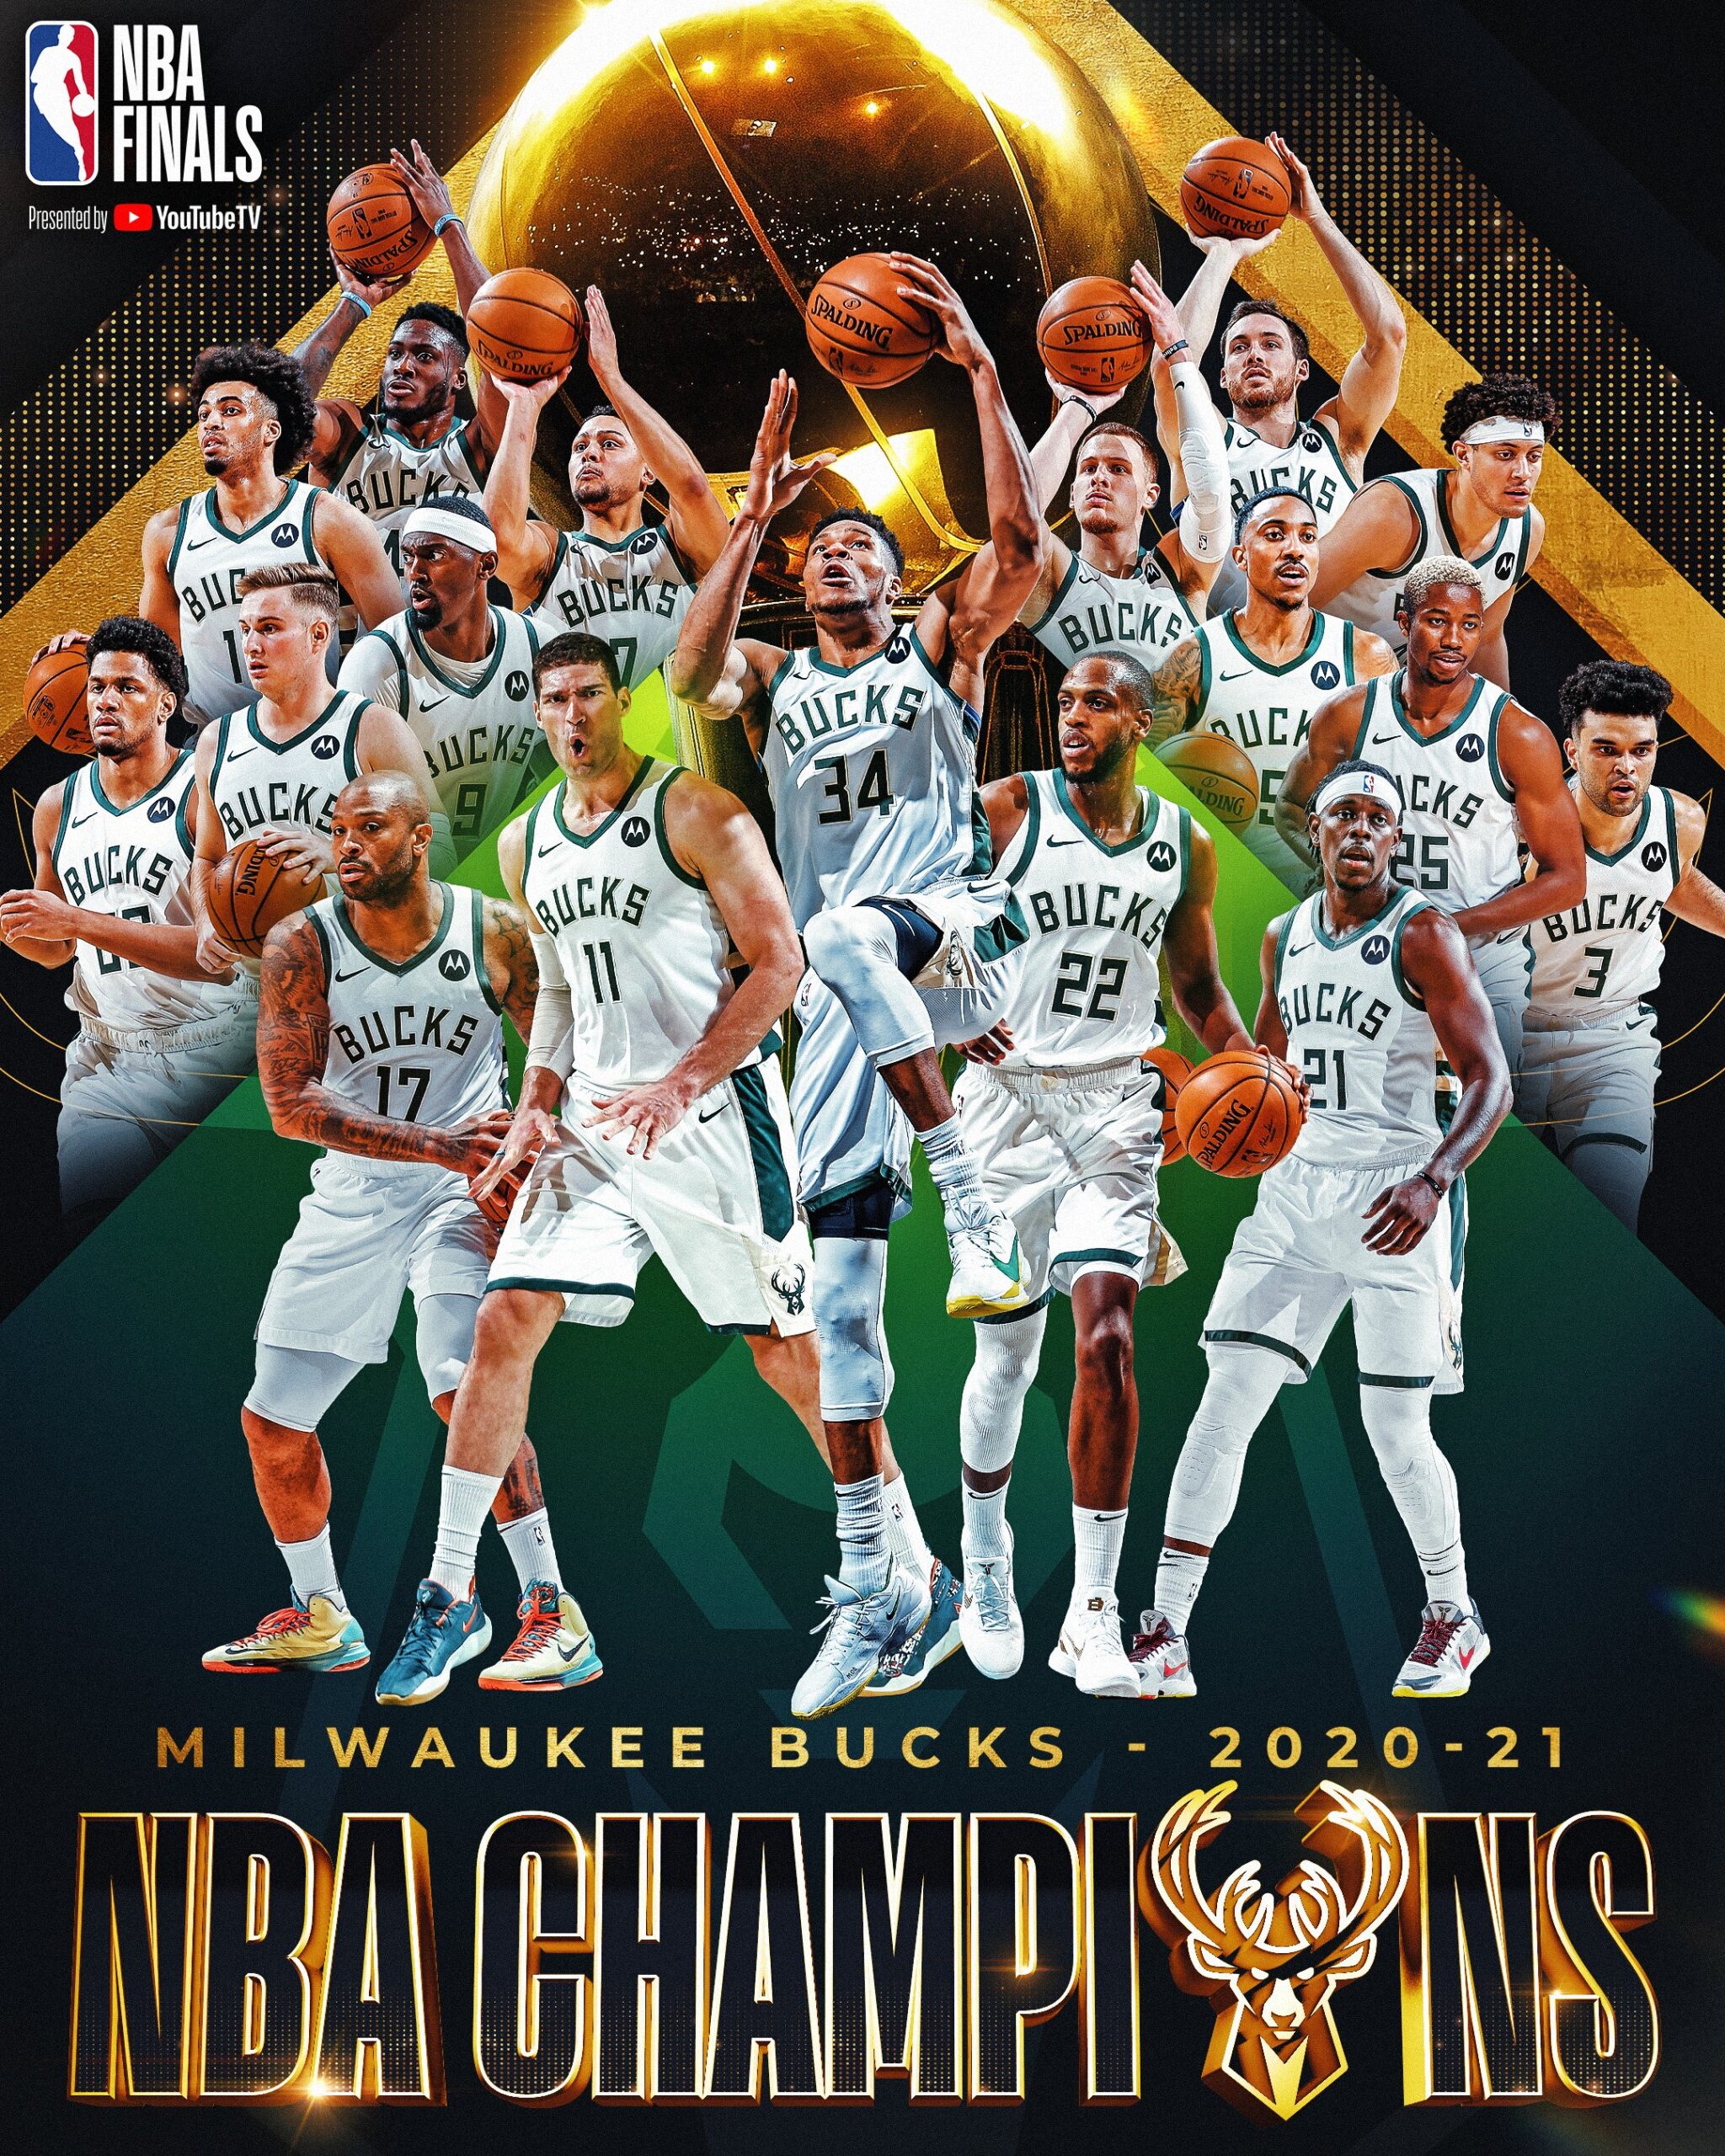 bucks-wins-2021-championship-after-defeating-suns-105-98-in-game-6